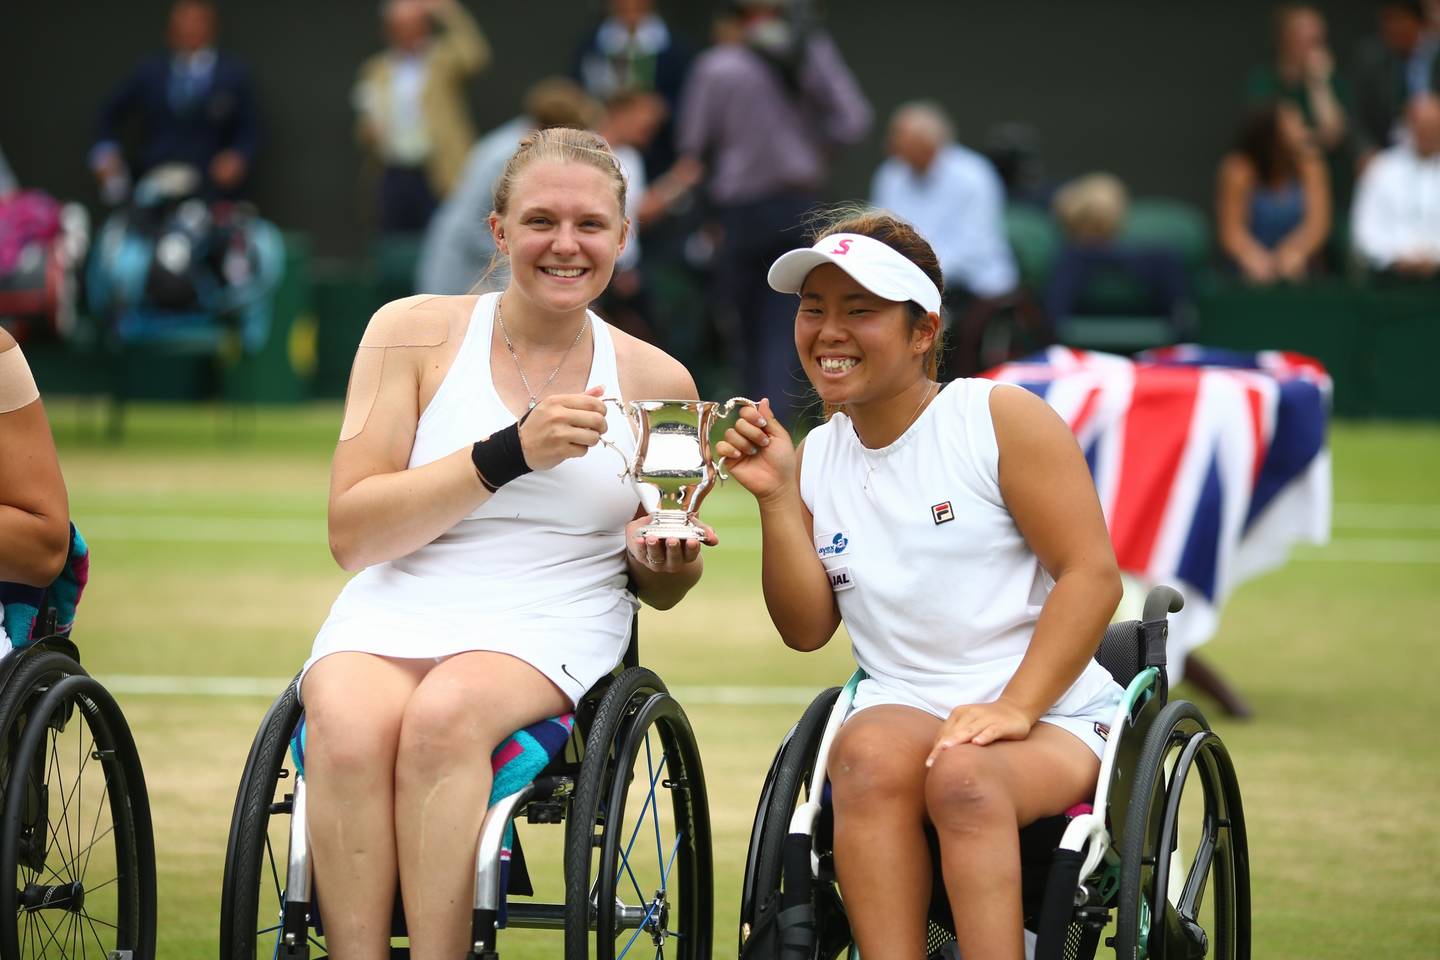 Ladies' Doubles partners Jordanne Whiley and Yui Kamiji holding winners trophy at Wimbledon.